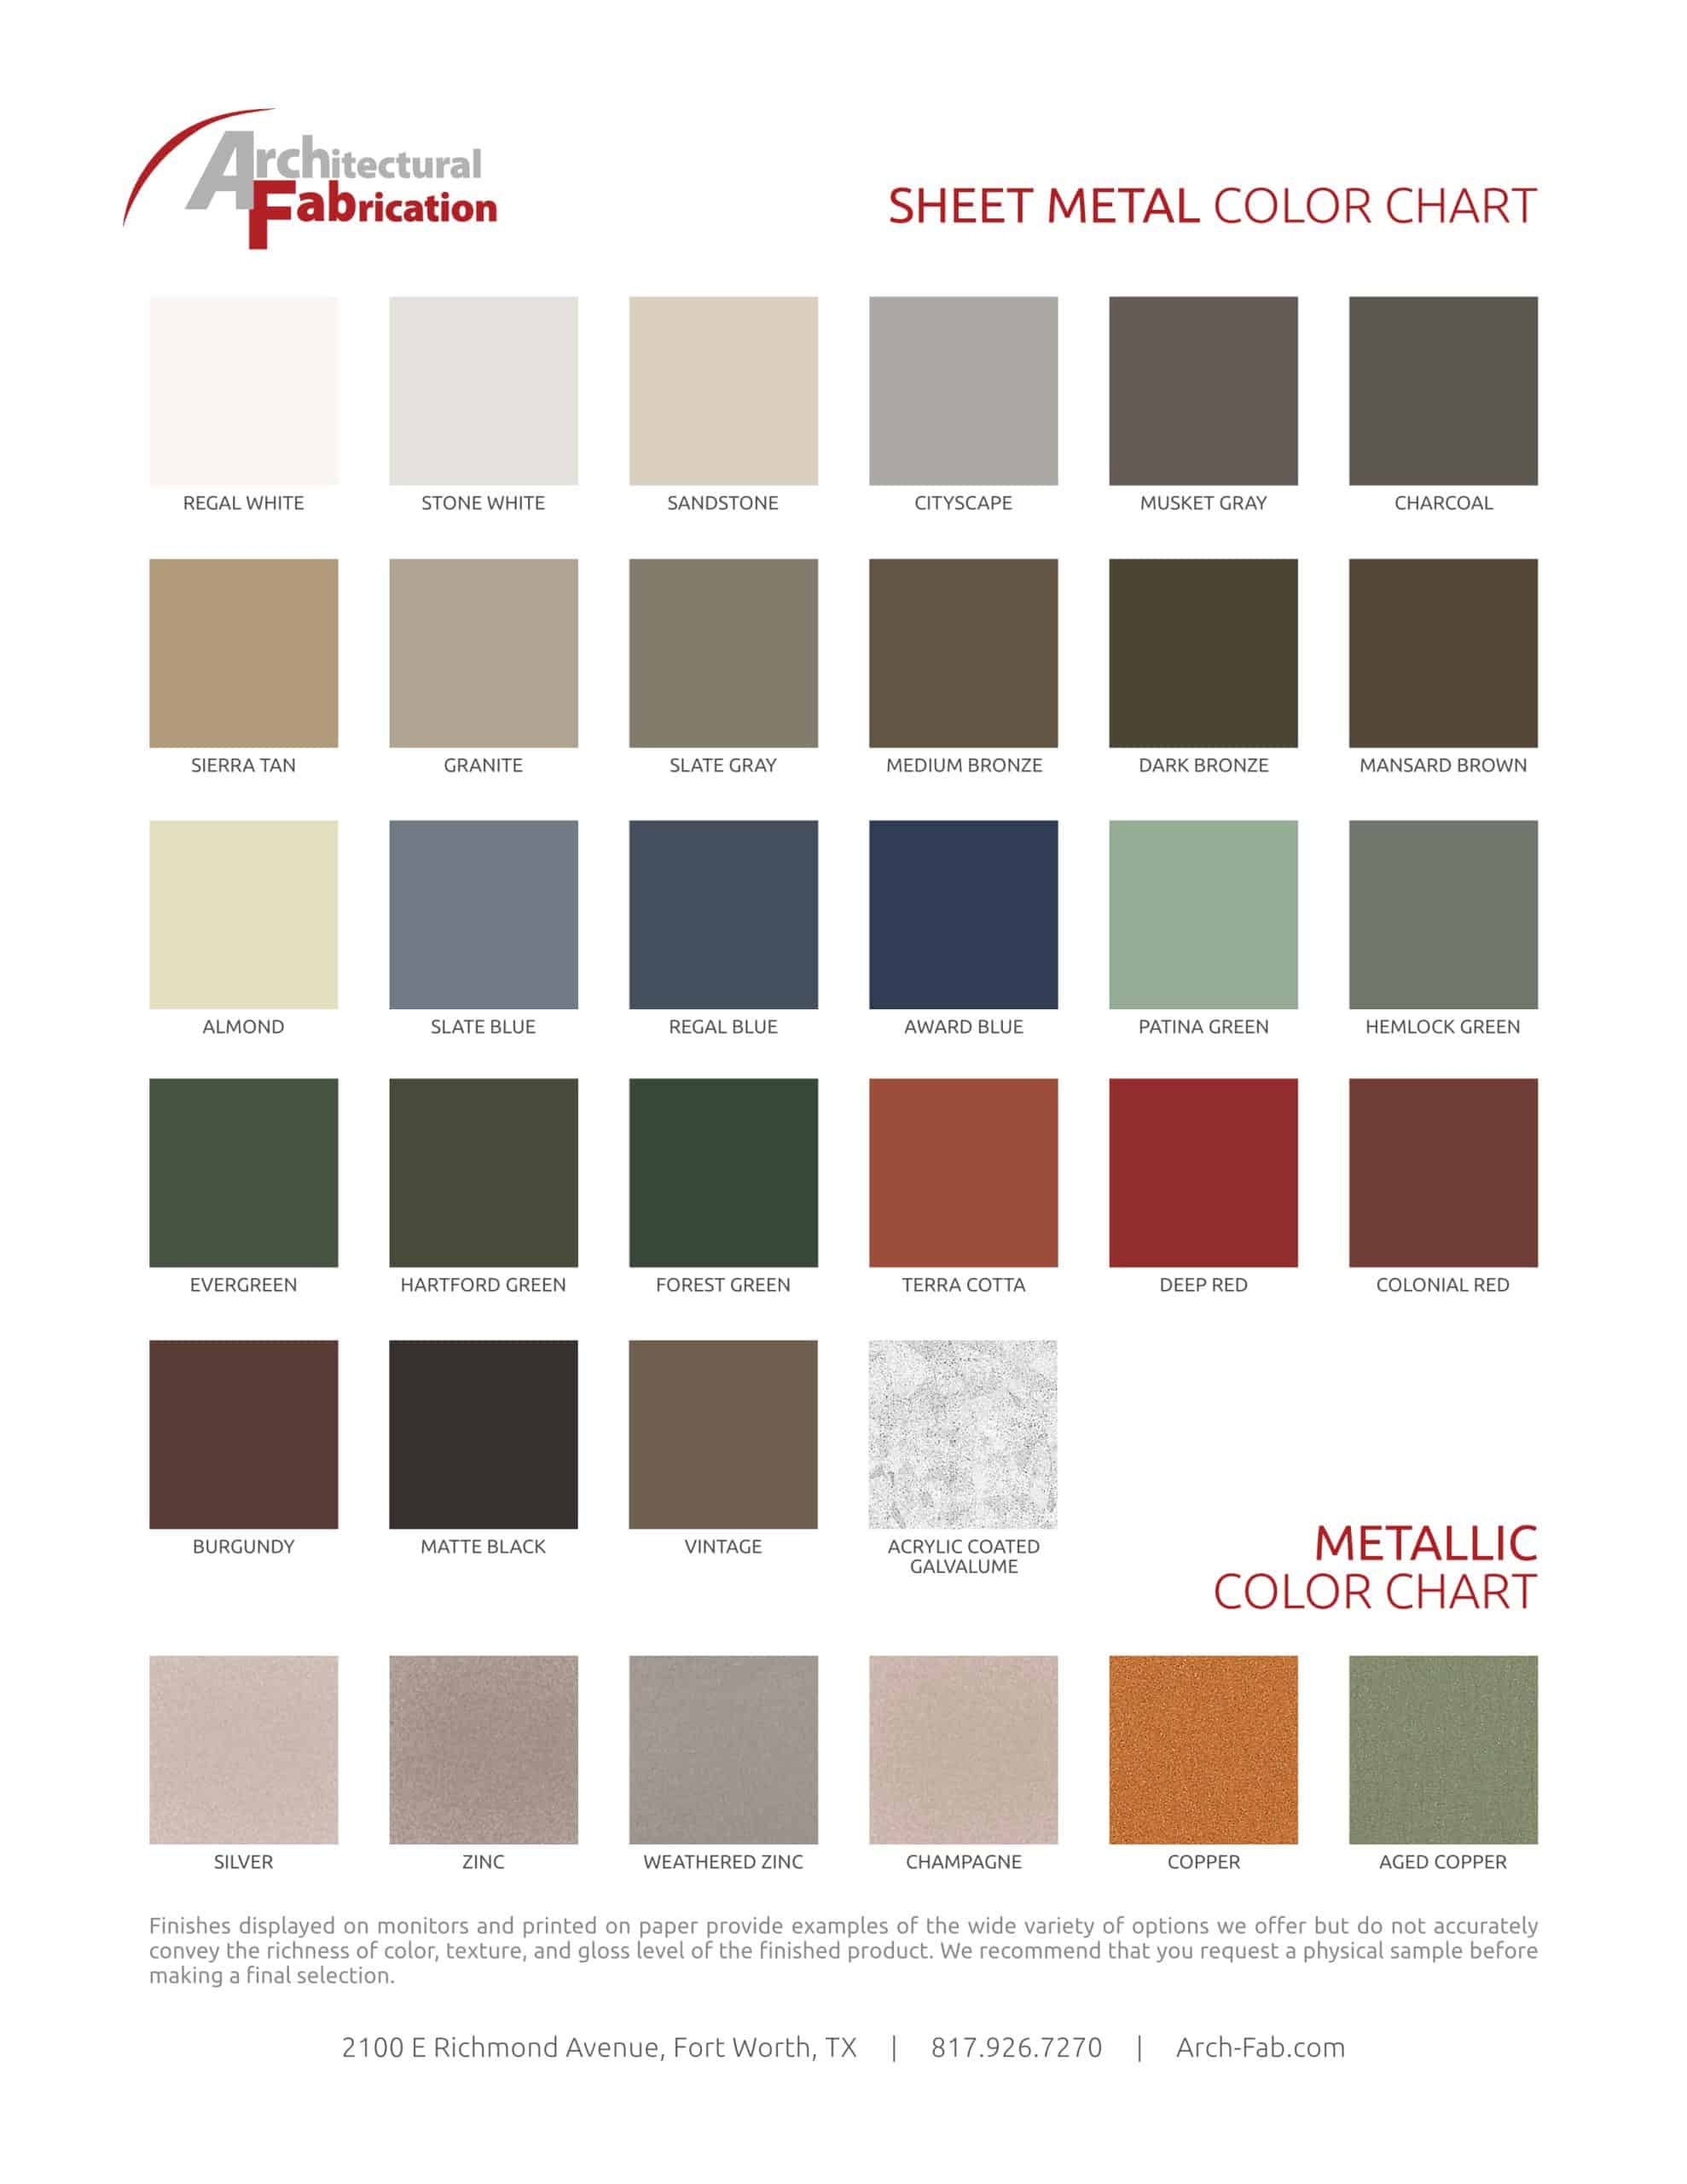 Arch-Fab Sheet Metal Color Chart